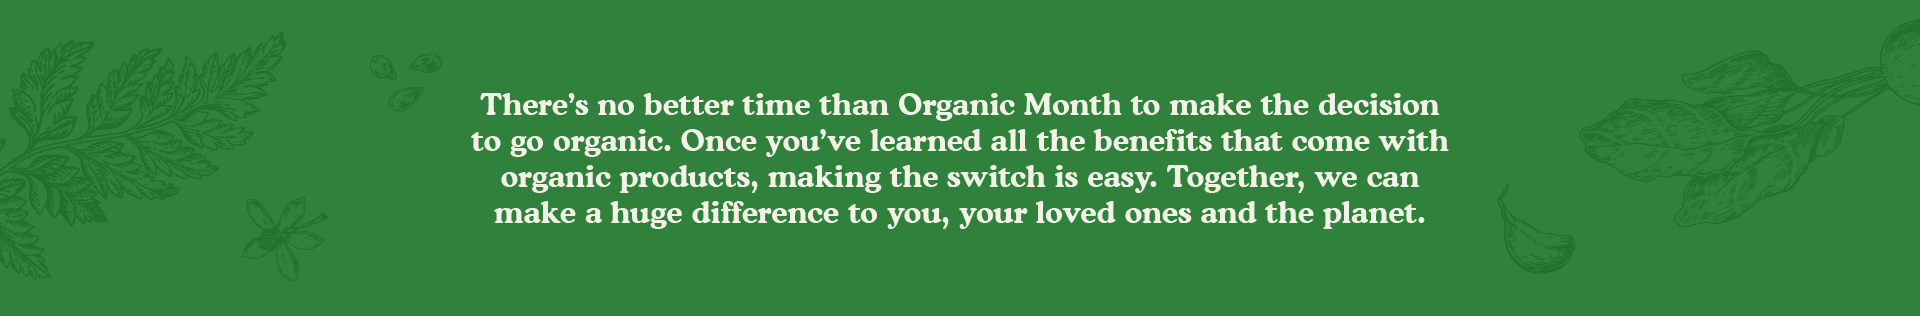 There's no better time to go organic than Organic Month